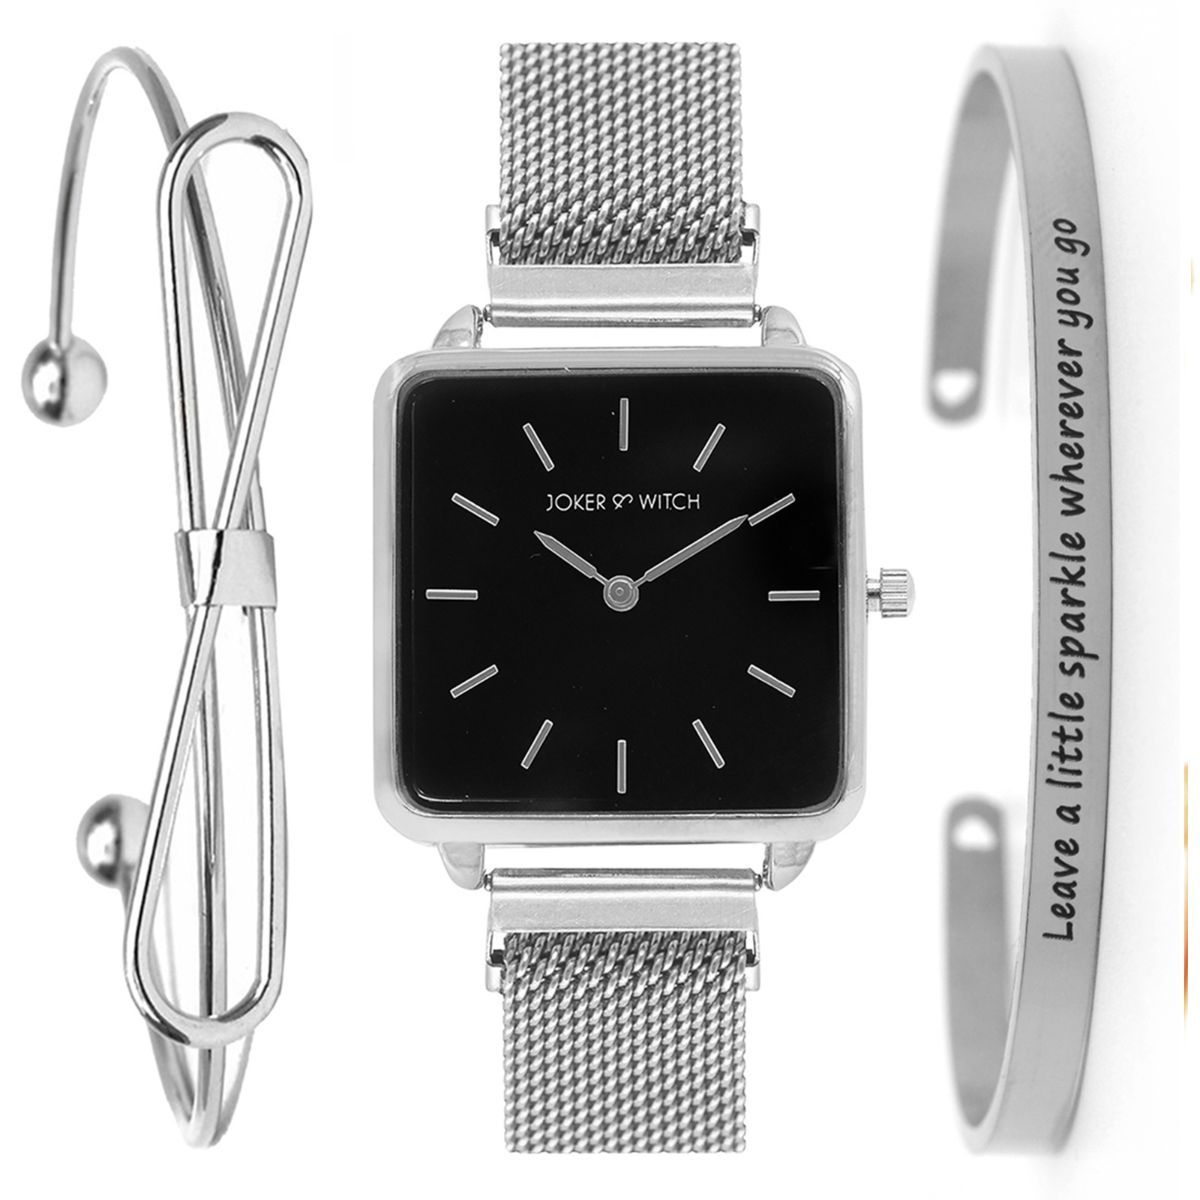 frozil Silver Bracelet And Watch for Women Watch for GirlsCombo Of 3  Analog Watch  For Women  Buy frozil Silver Bracelet And Watch for Women  Watch for GirlsCombo Of 3 Analog